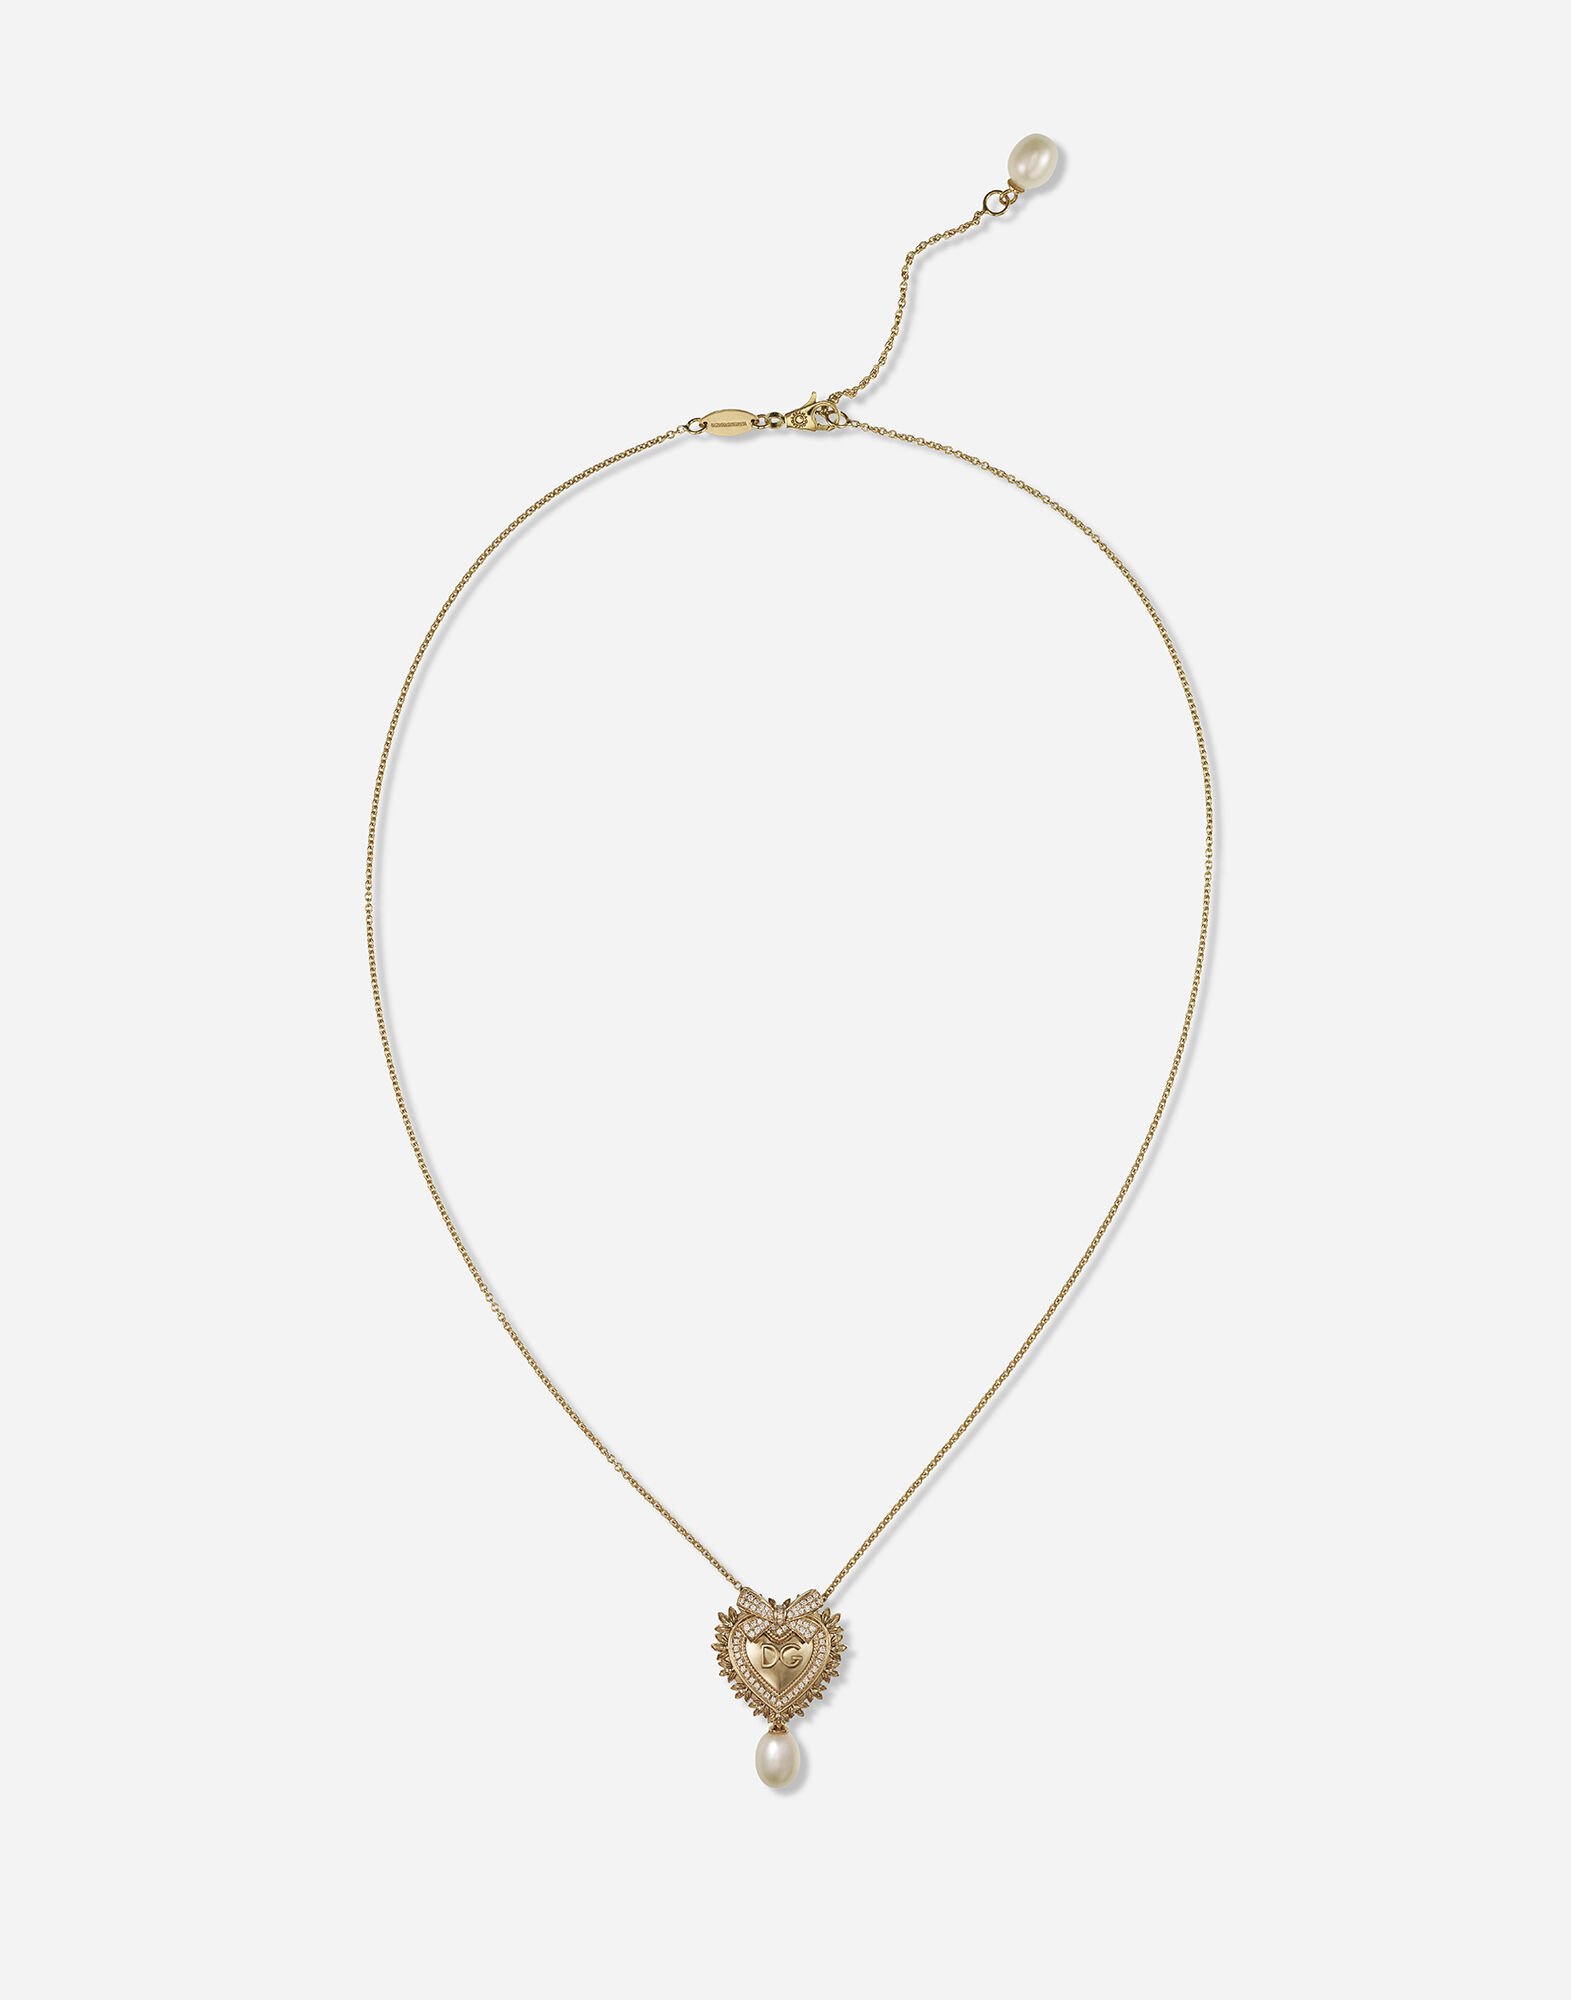 Dolce & Gabbana Devotion necklace in yellow gold with diamonds and pearls Yellow Gold WELD2GWDPY1